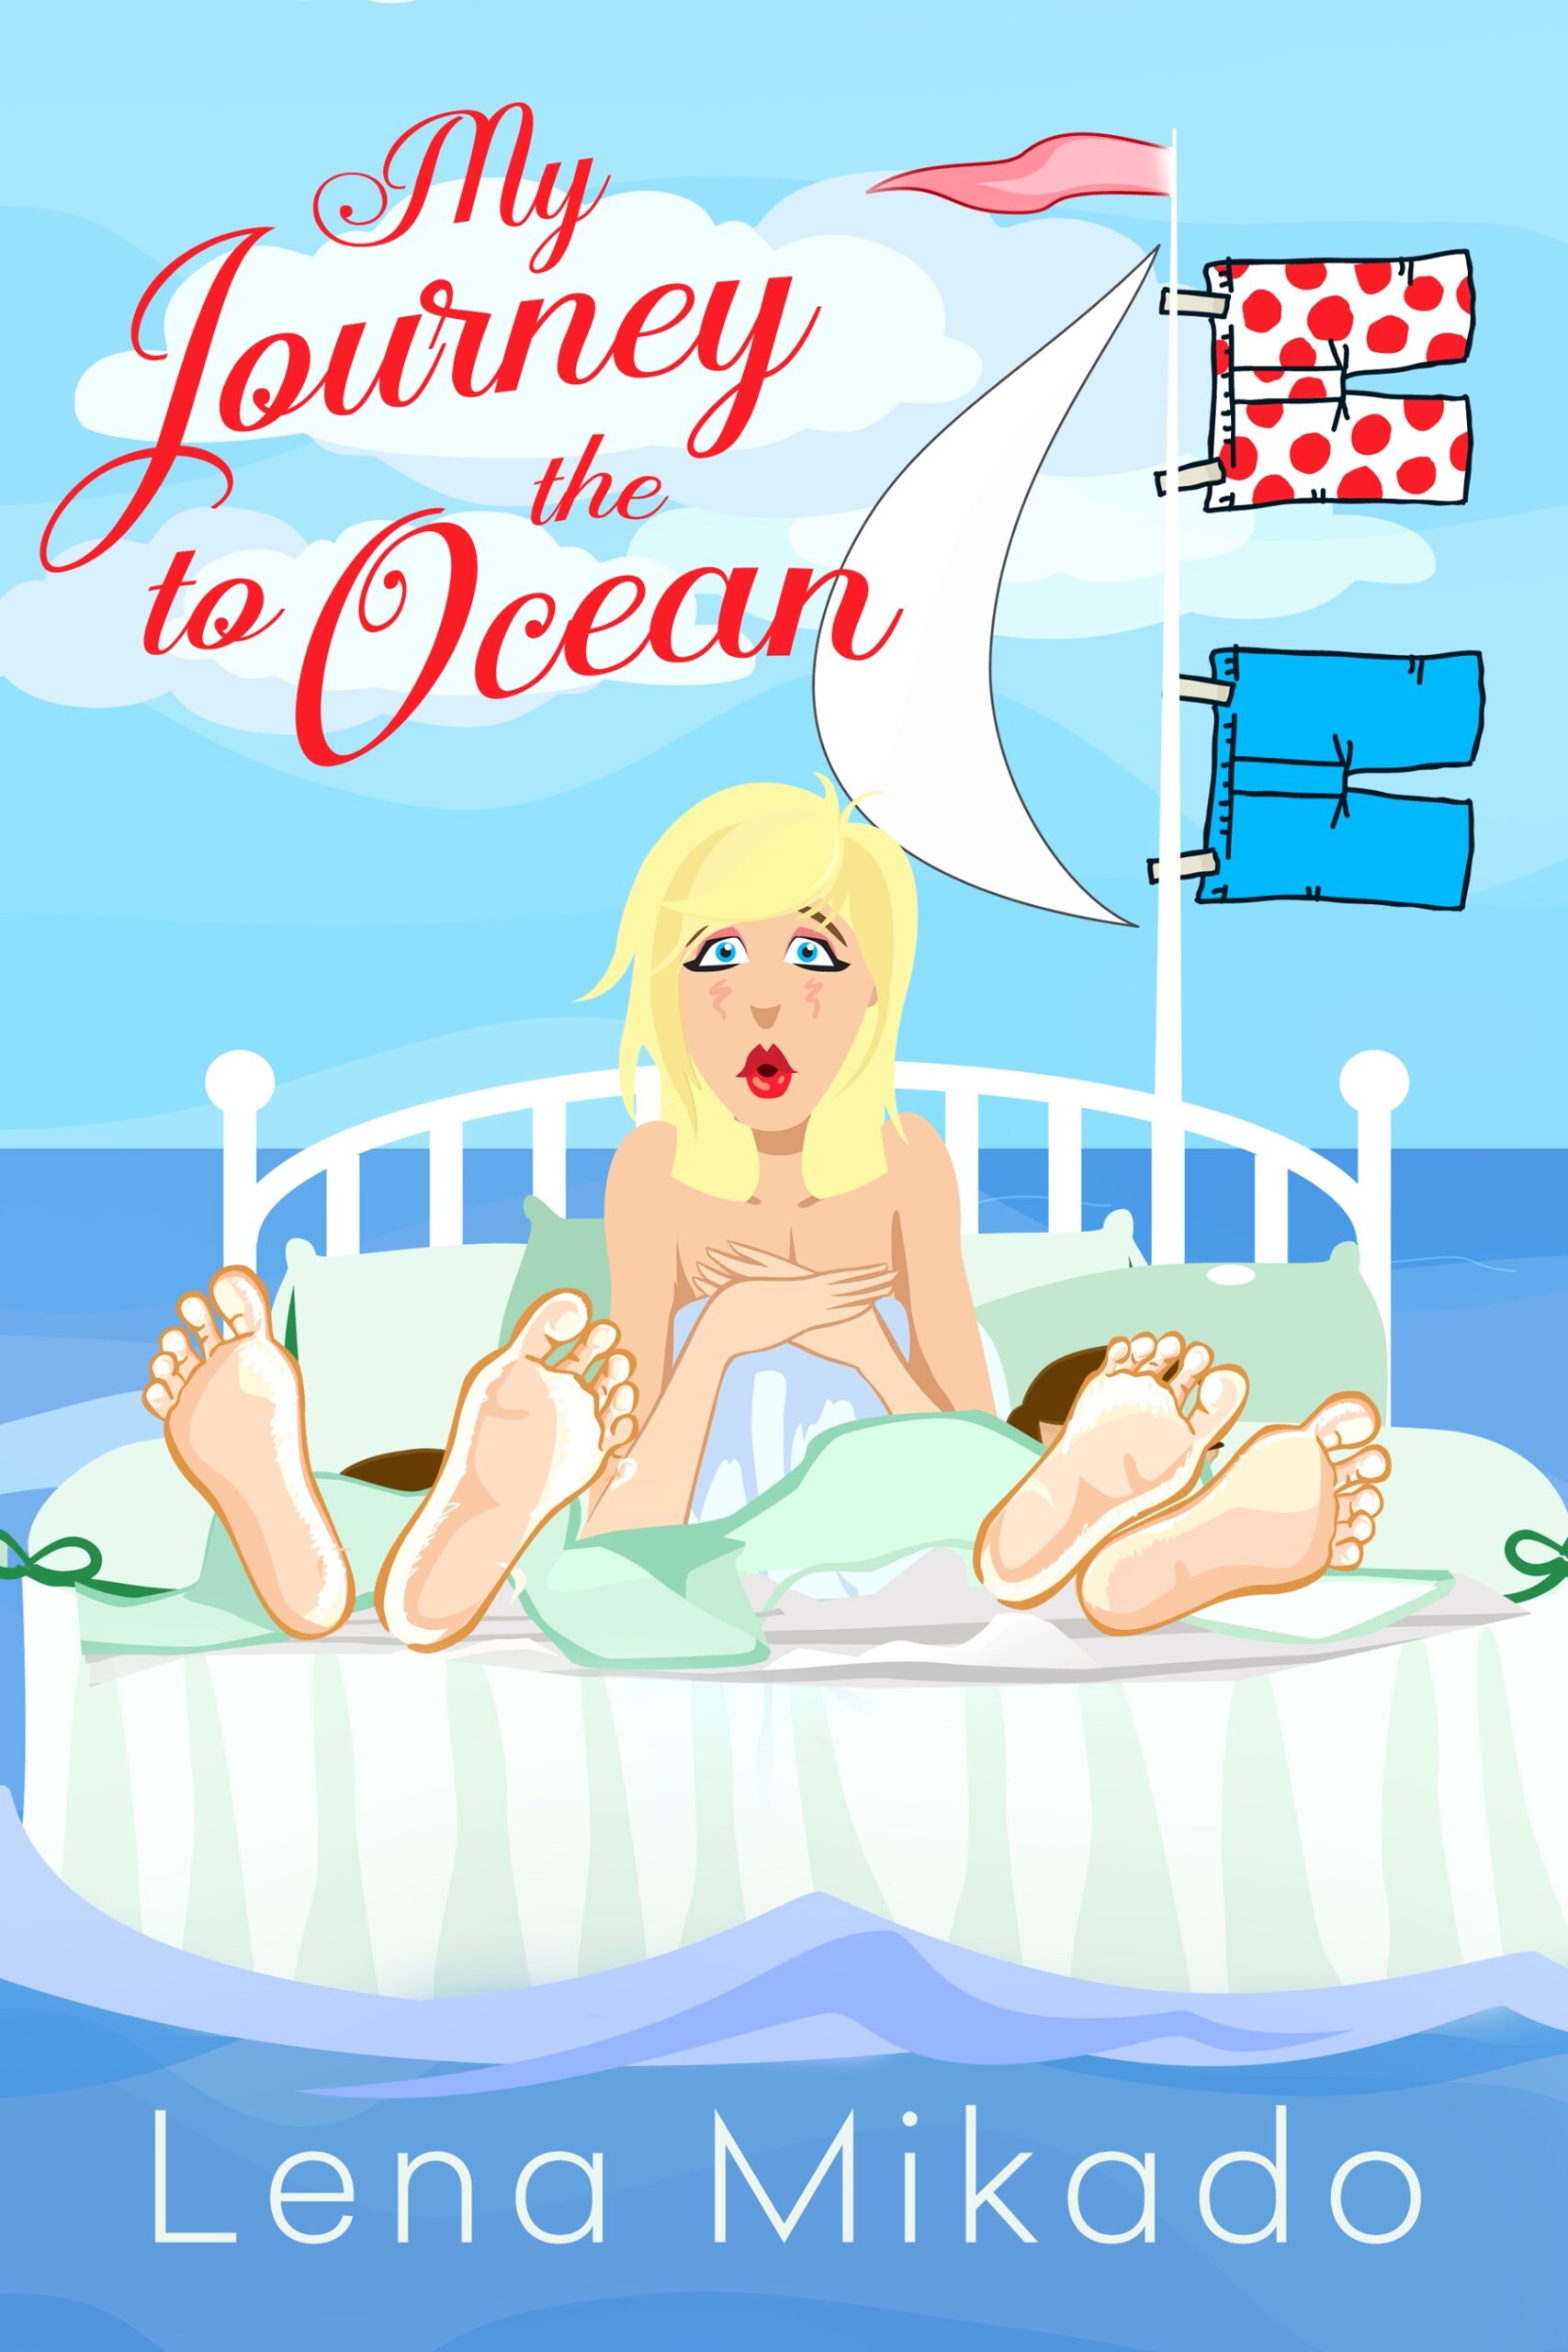 FREE: My Journey to the Ocean by Lena Mikado